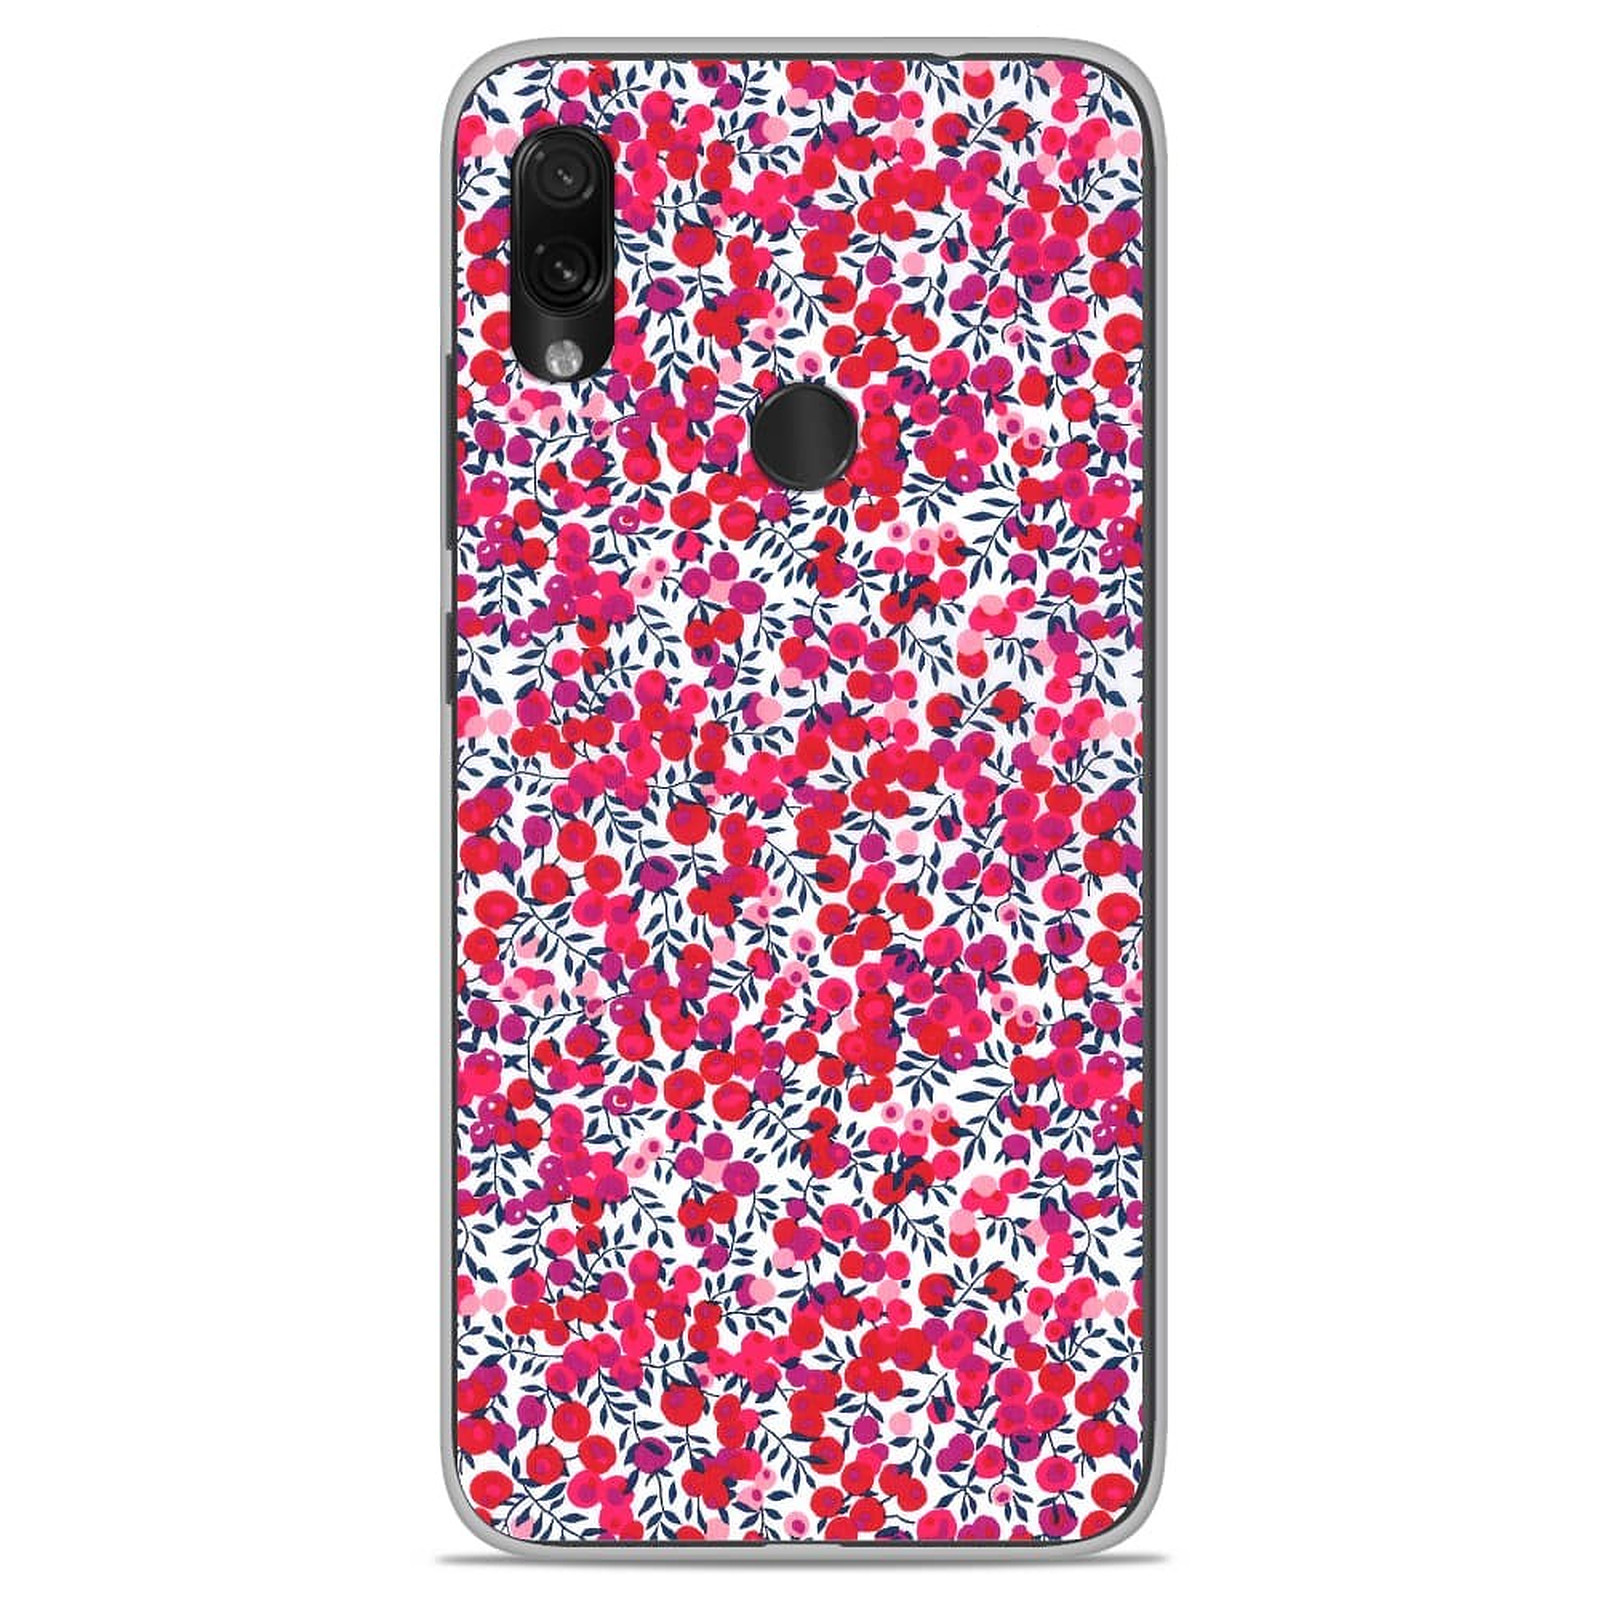 1001 Coques Coque silicone gel Xiaomi Redmi Note 7 / Note 7 Pro motif Liberty Wiltshire Rouge - Coque telephone 1001Coques